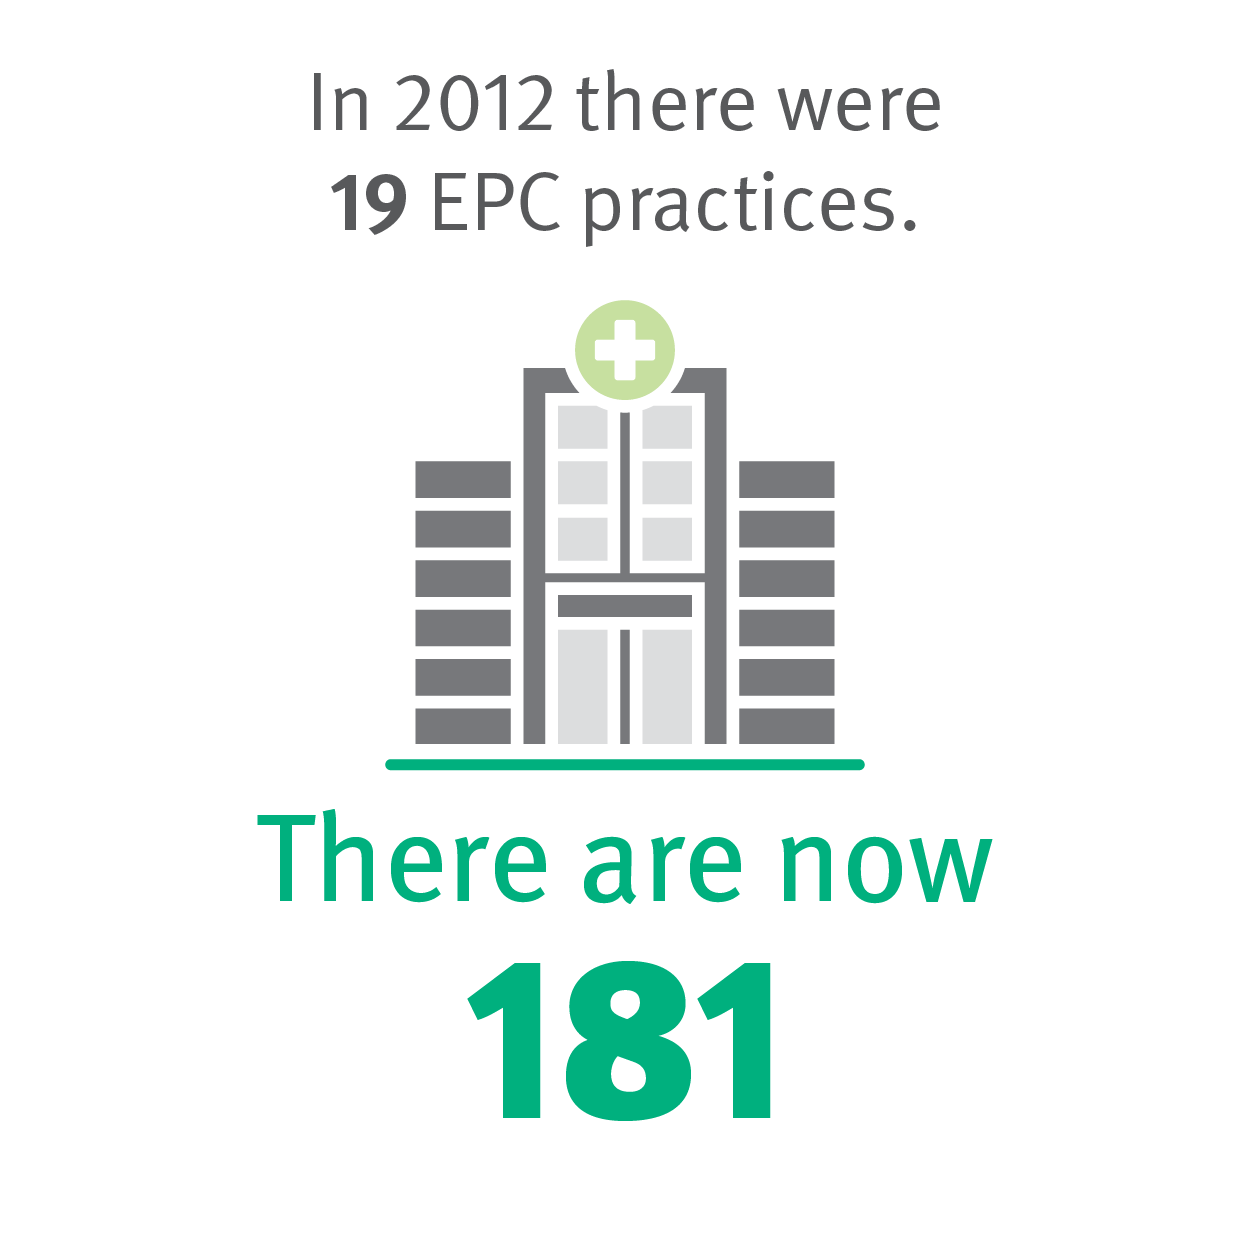 In 2012 there were 19 EPC Practices, there are now 181